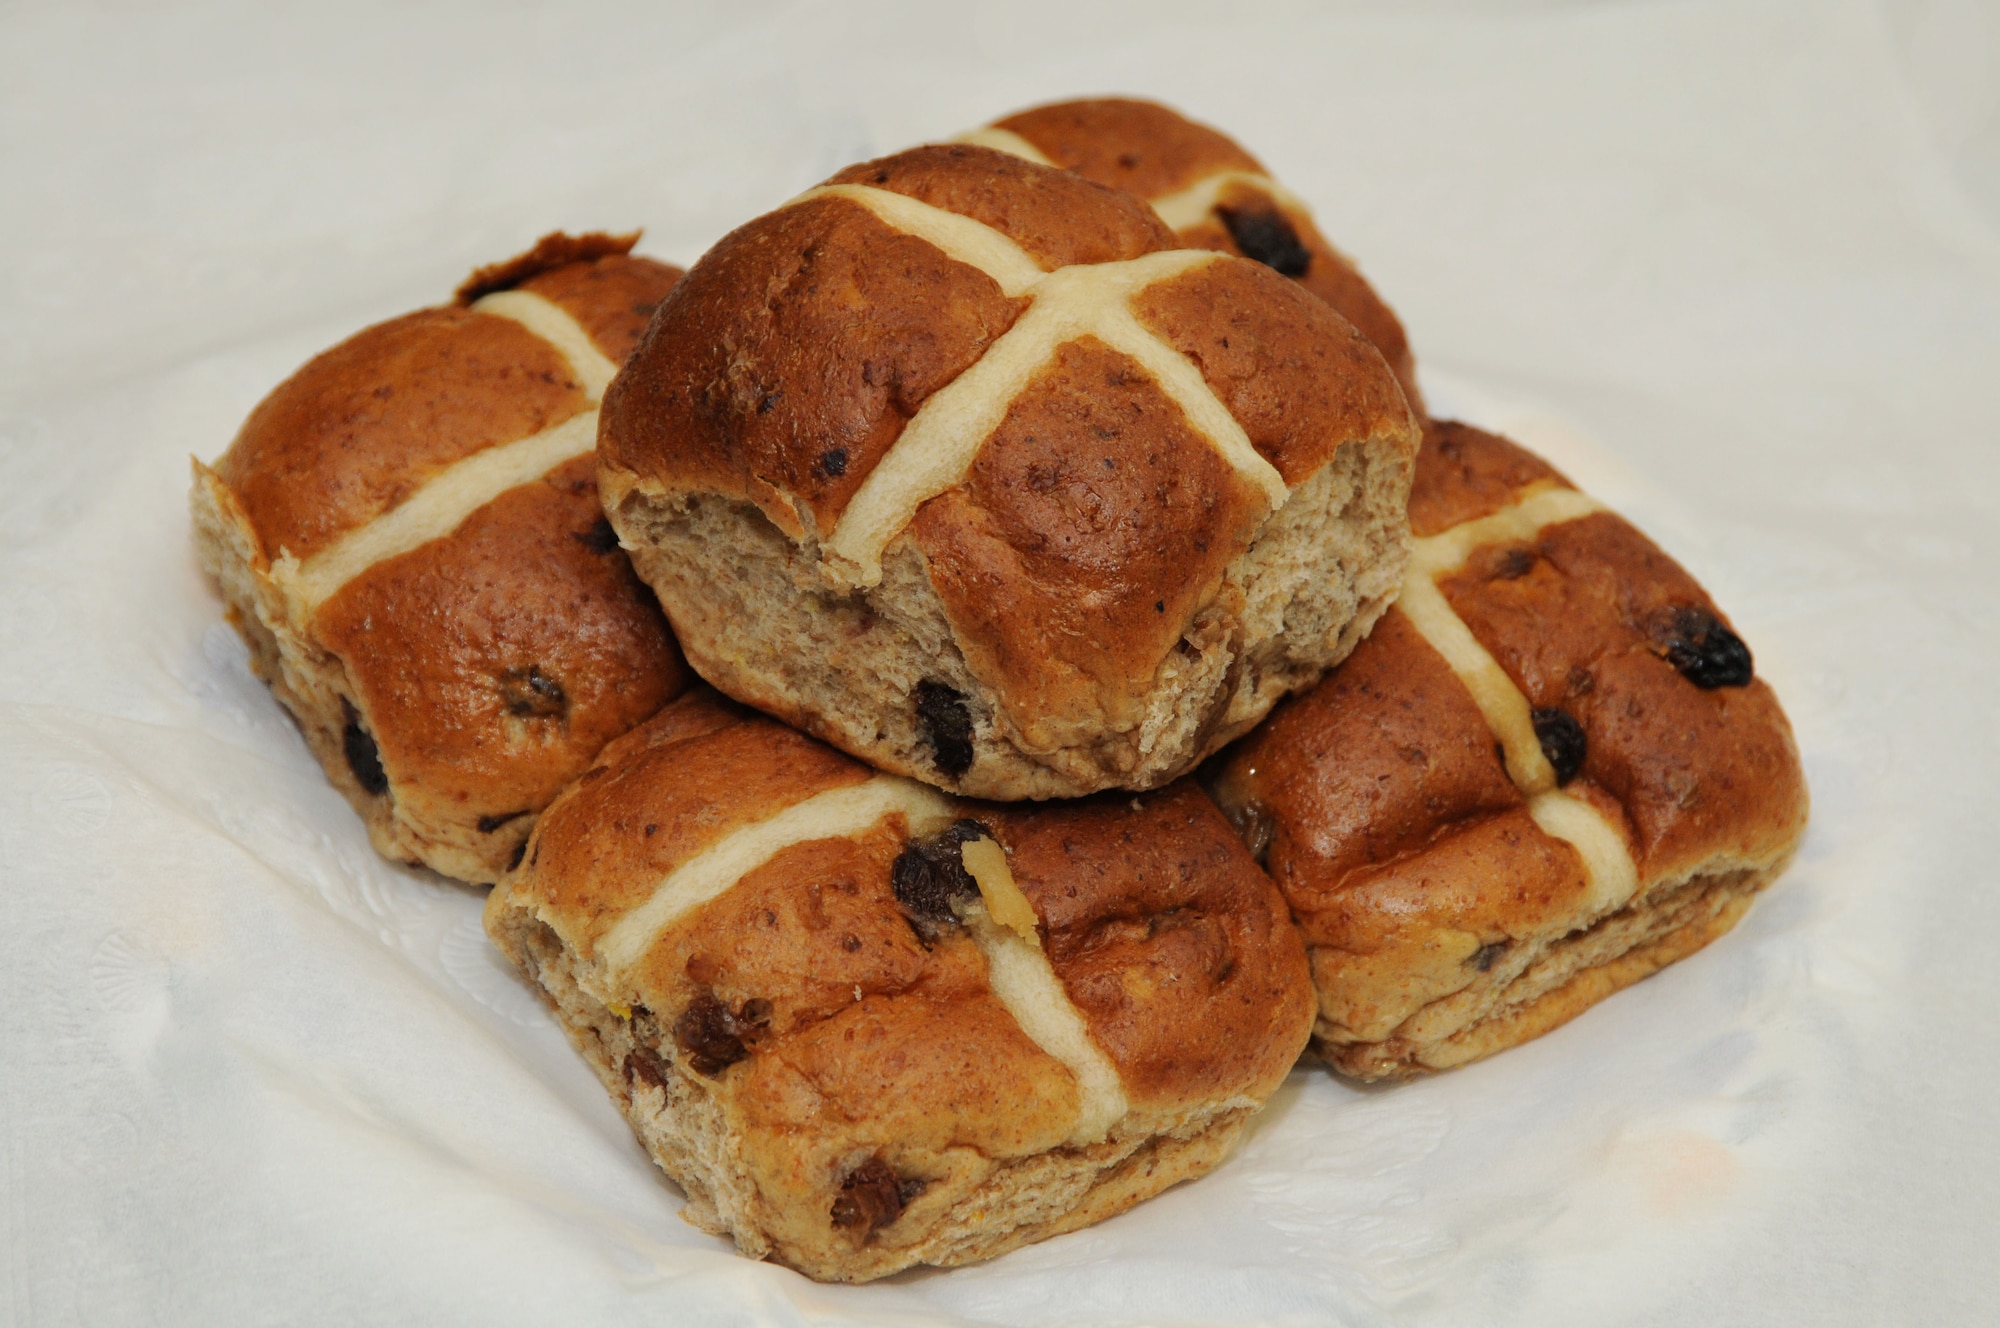 Hot cross buns are a quintessentially British tradition at Easter.They can be eaten warm or split, toasted with butter for breakfast, tea or a snack. No one knows for certain when the tradition began, but in 16th century England, bakers were limited by law to occasions when these special doughs could be made. Good Friday was one; ‘cross buns’ marked this holy day towards the end of the Lenten fast. (U.S.Air Force photo by Senior Airmen Lausanne Morgan) 
